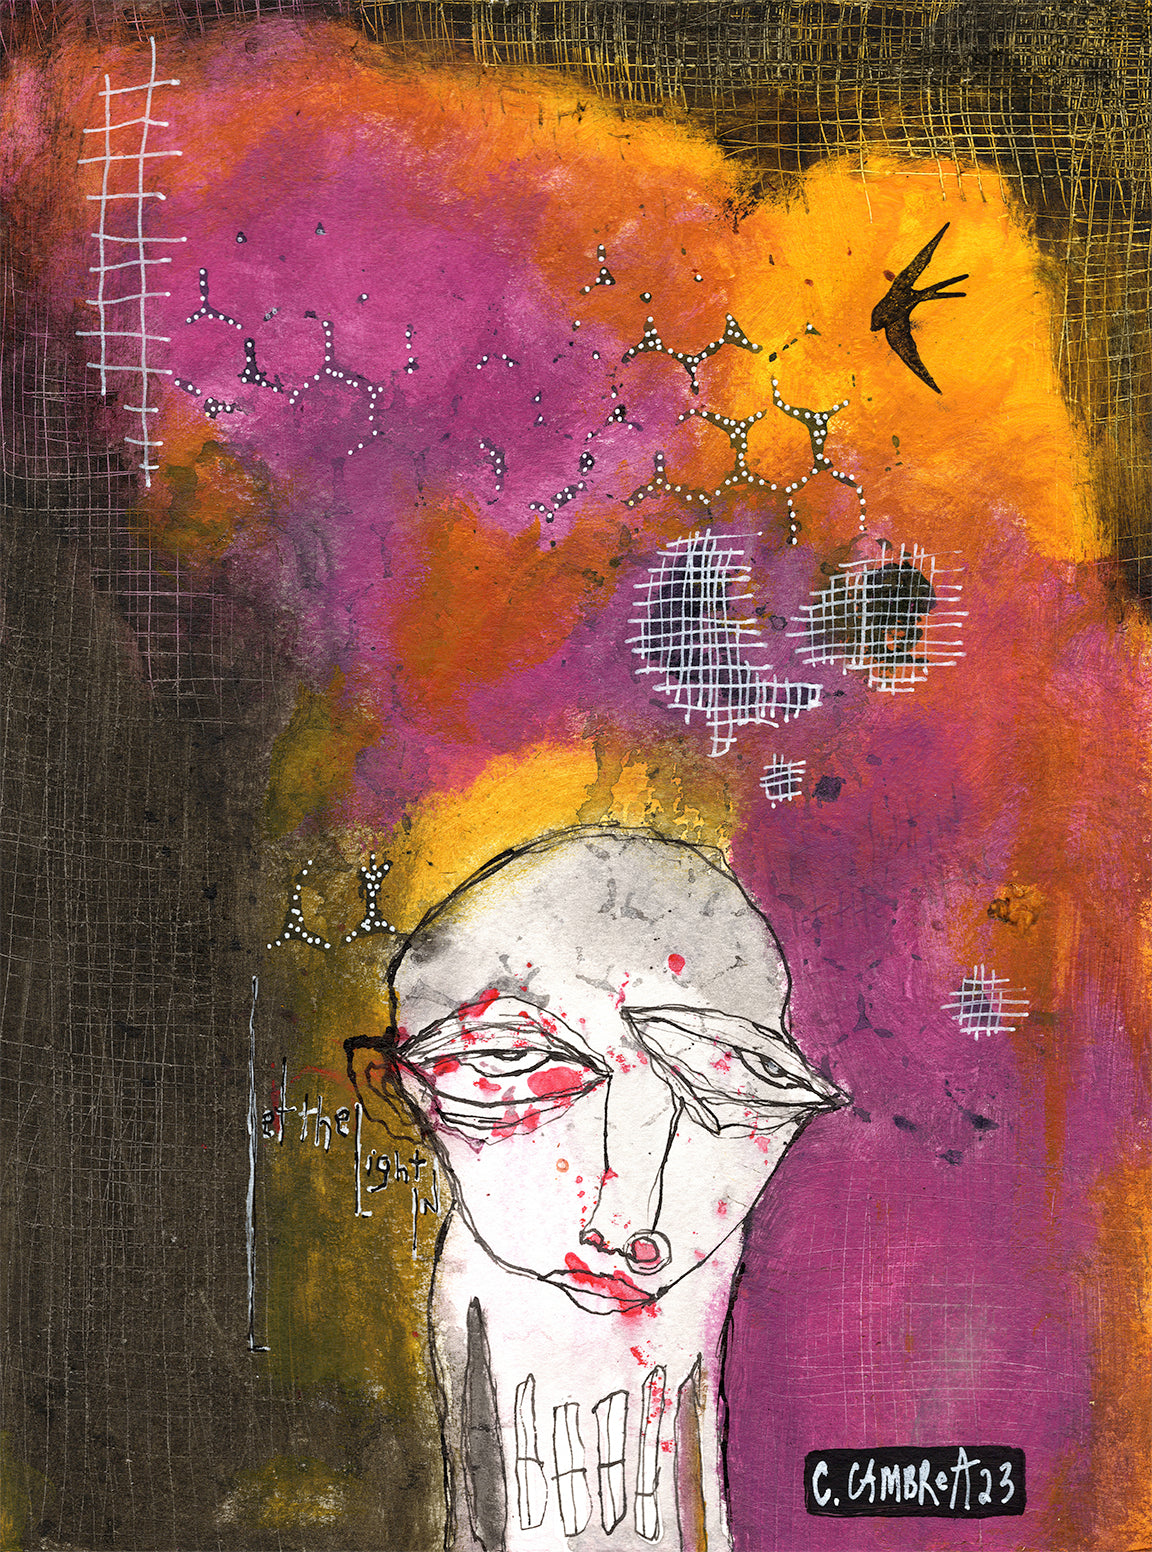 "Let the light in" Original Mixed Media art on Watercolor Paper